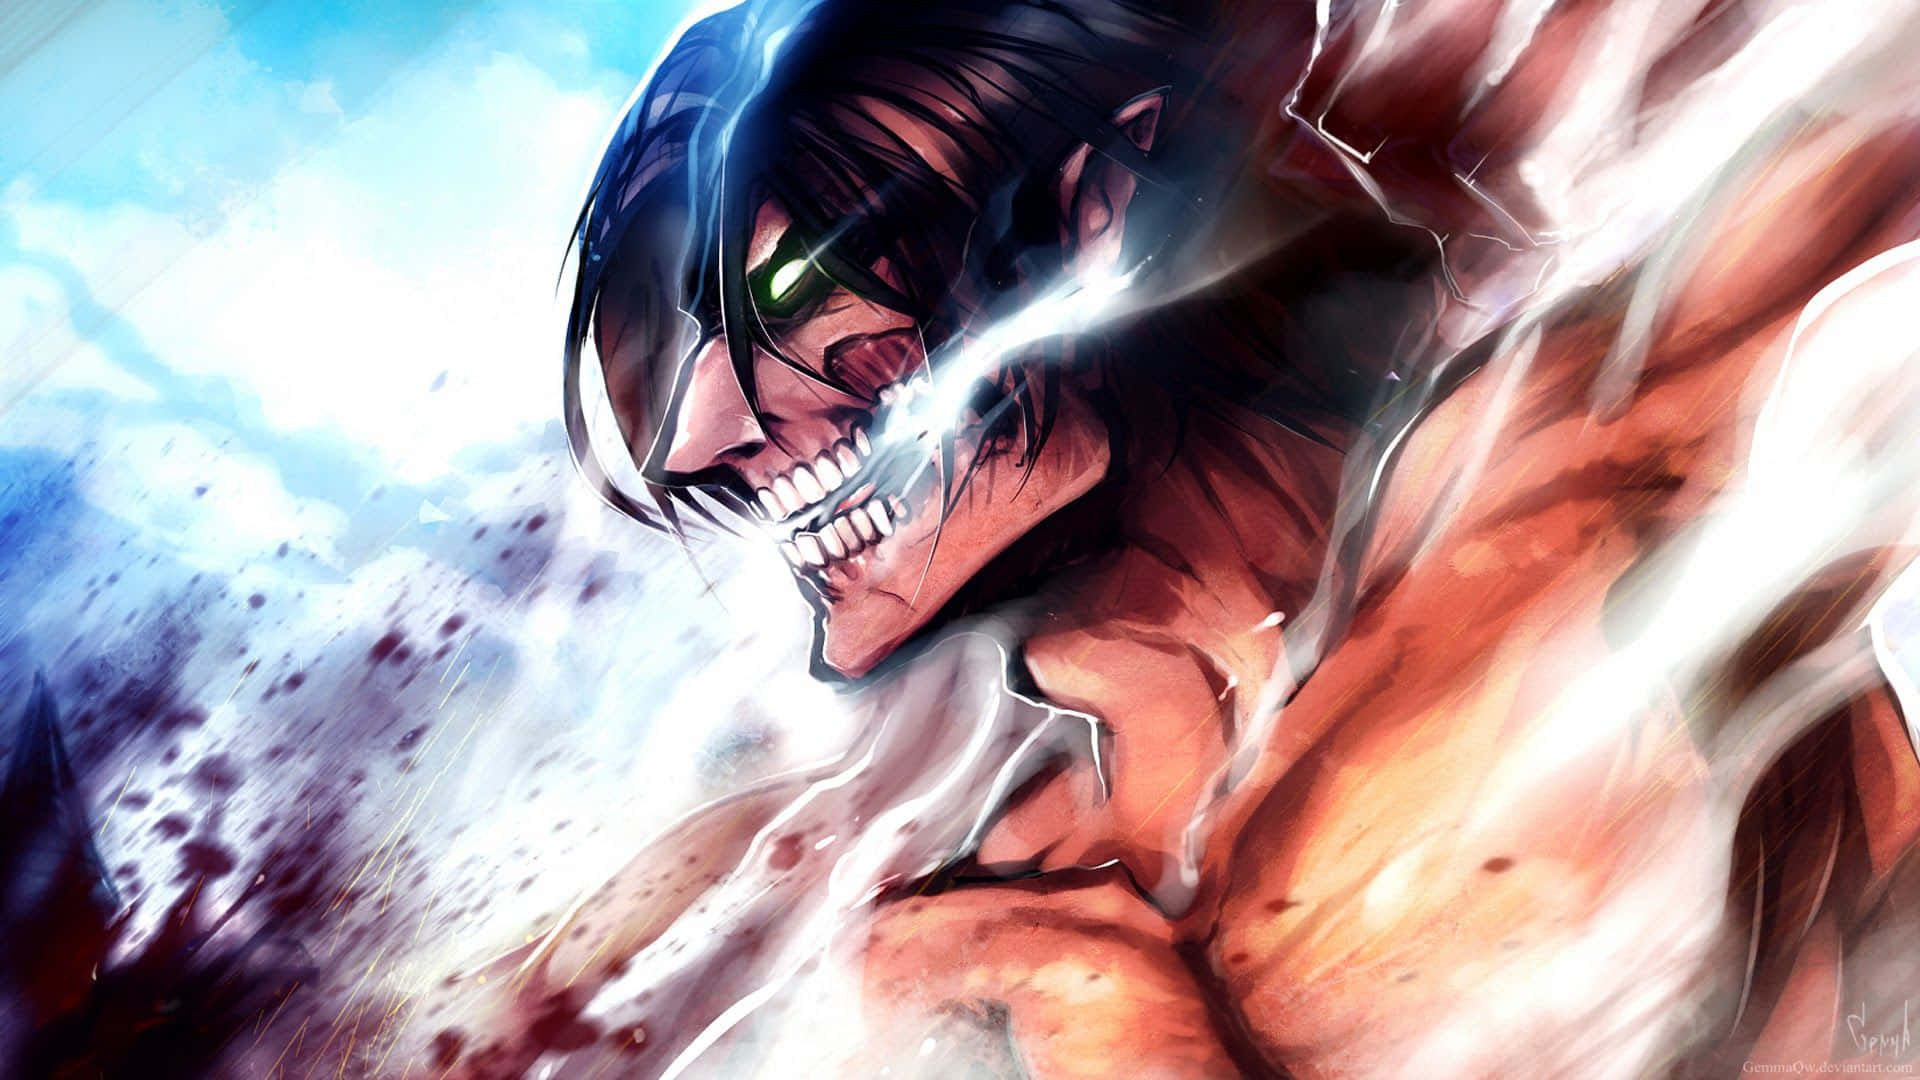 Prepare to be mind-blown by Attack On Titan's third season - a reinvigorated story packed with surprises Wallpaper